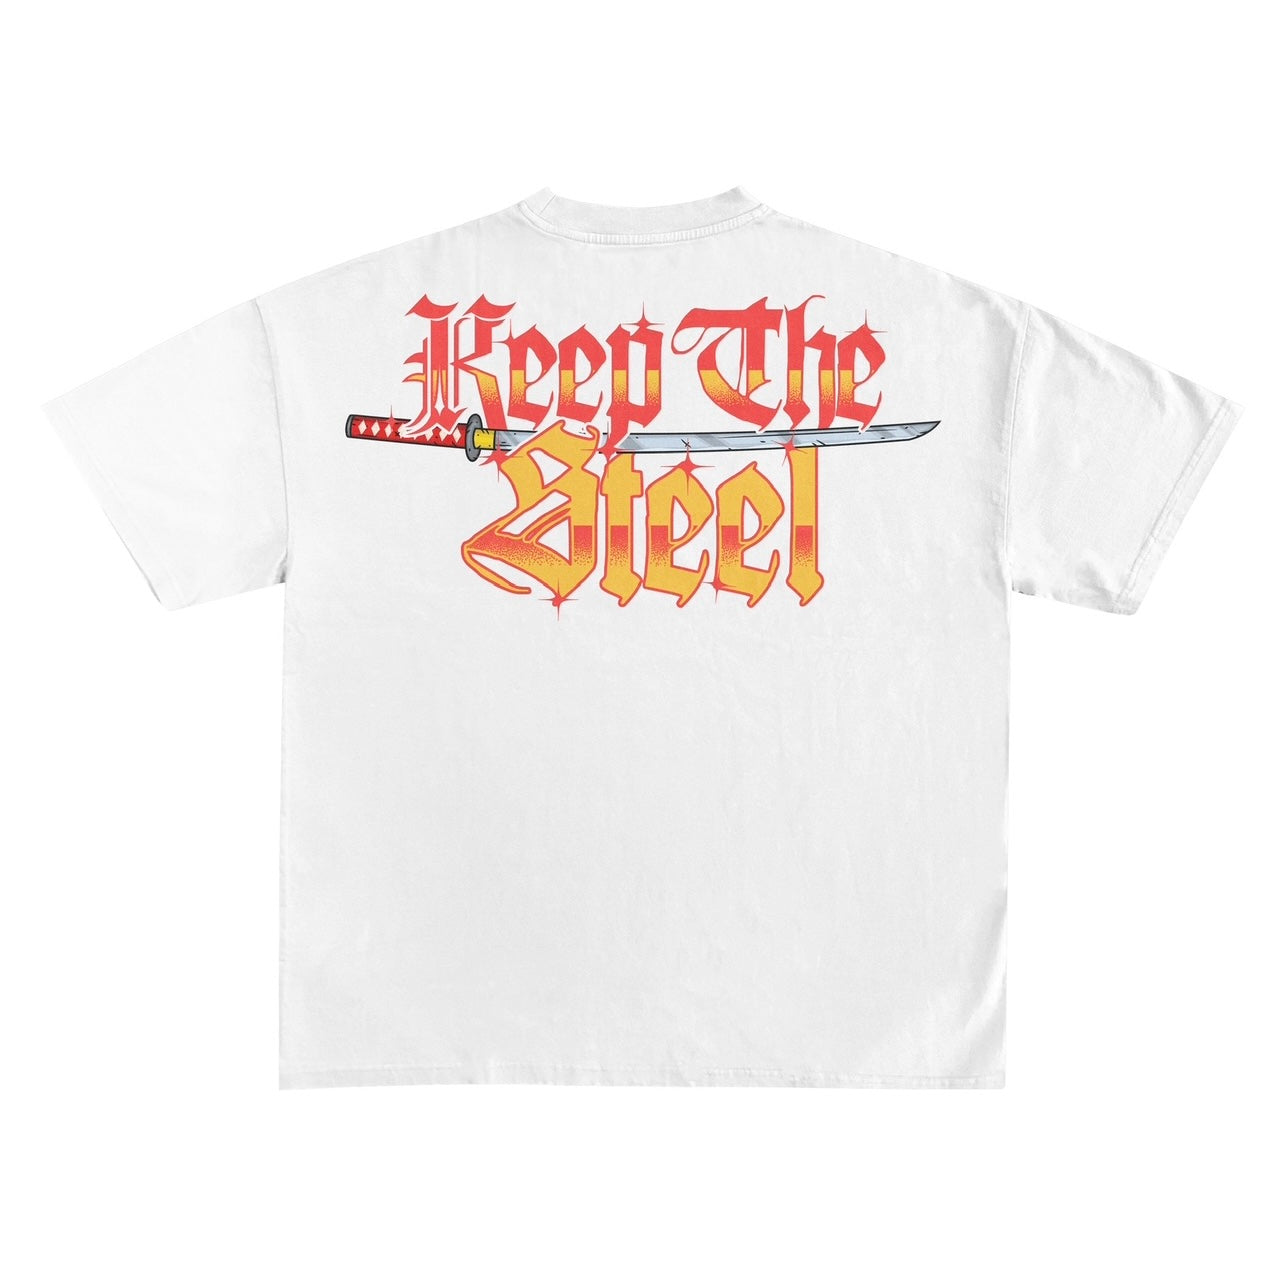 Keep the Steel - Red - T-Shirt